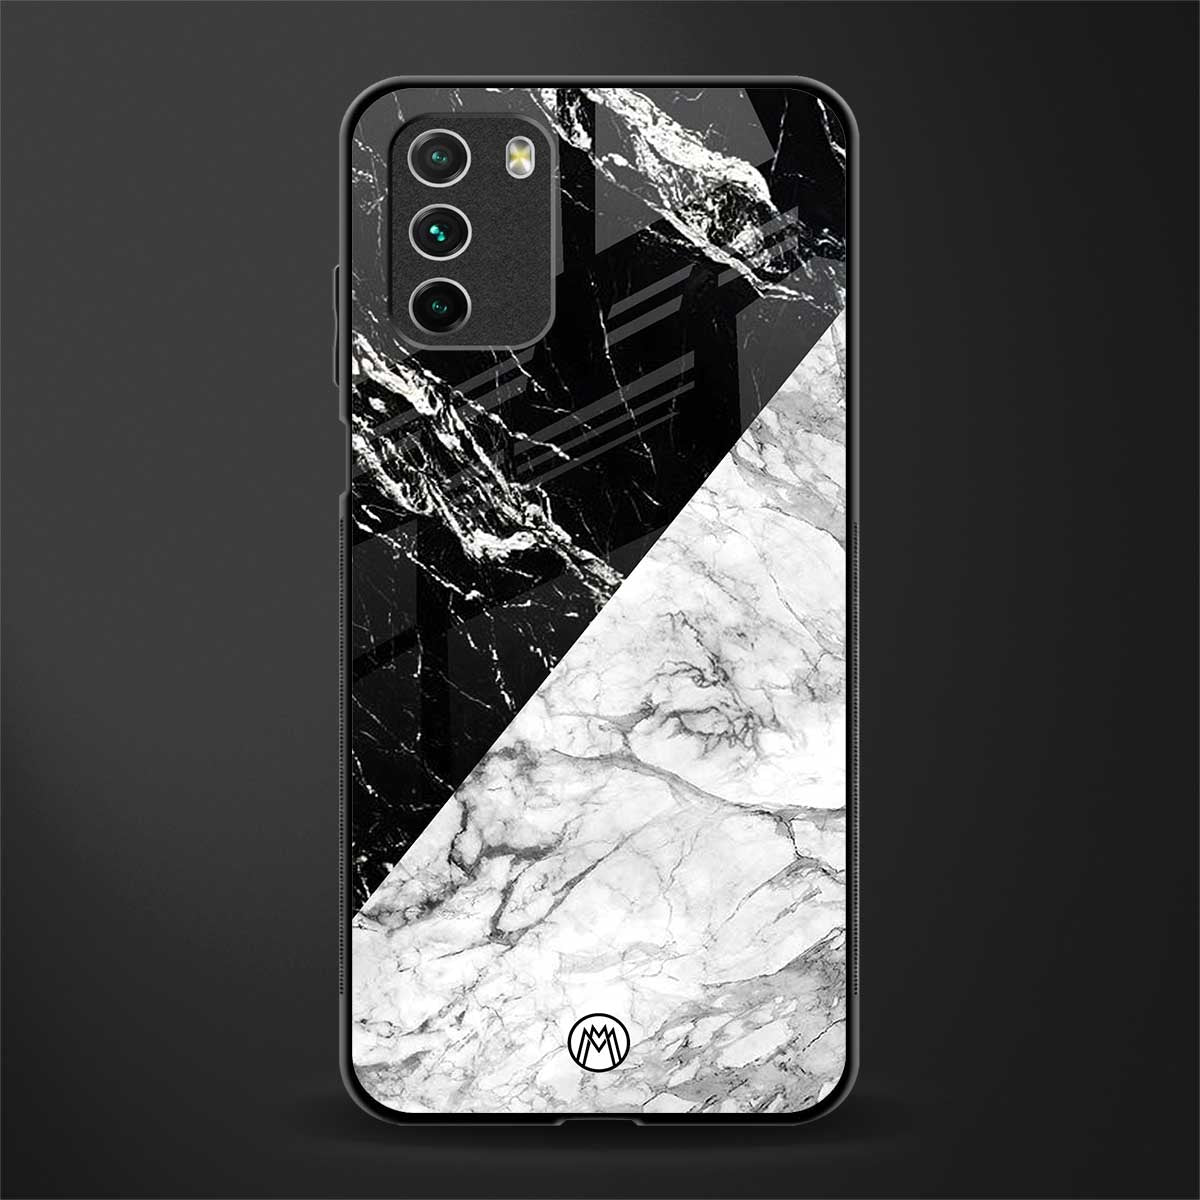 fatal contradiction phone cover for poco m3